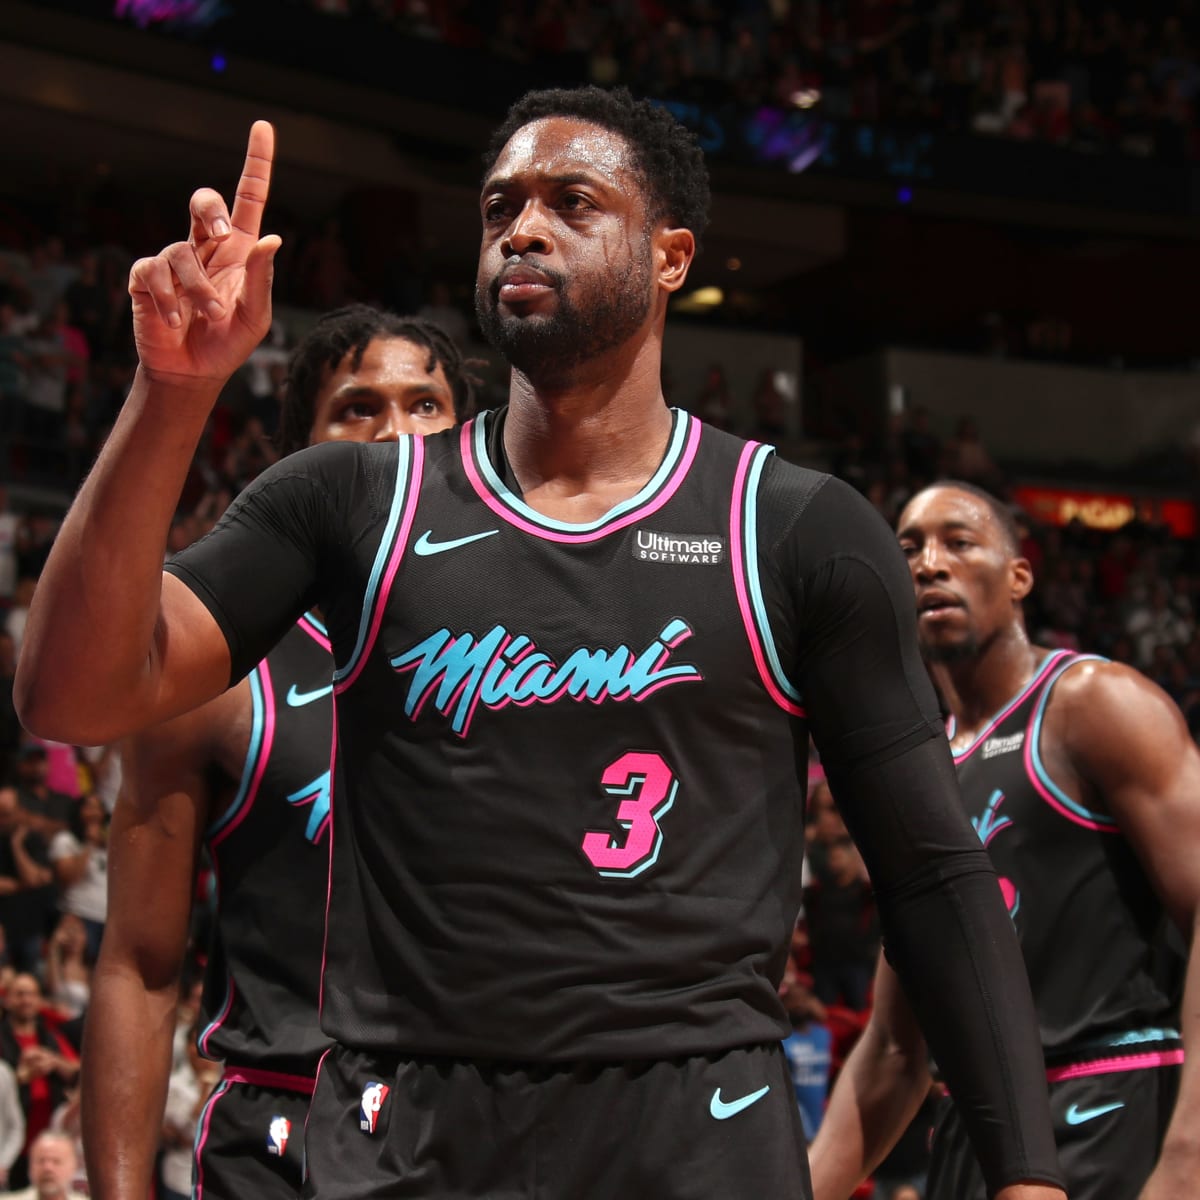 Miami Heat to retire Dwyane Wade's No. 3 jersey during three-day